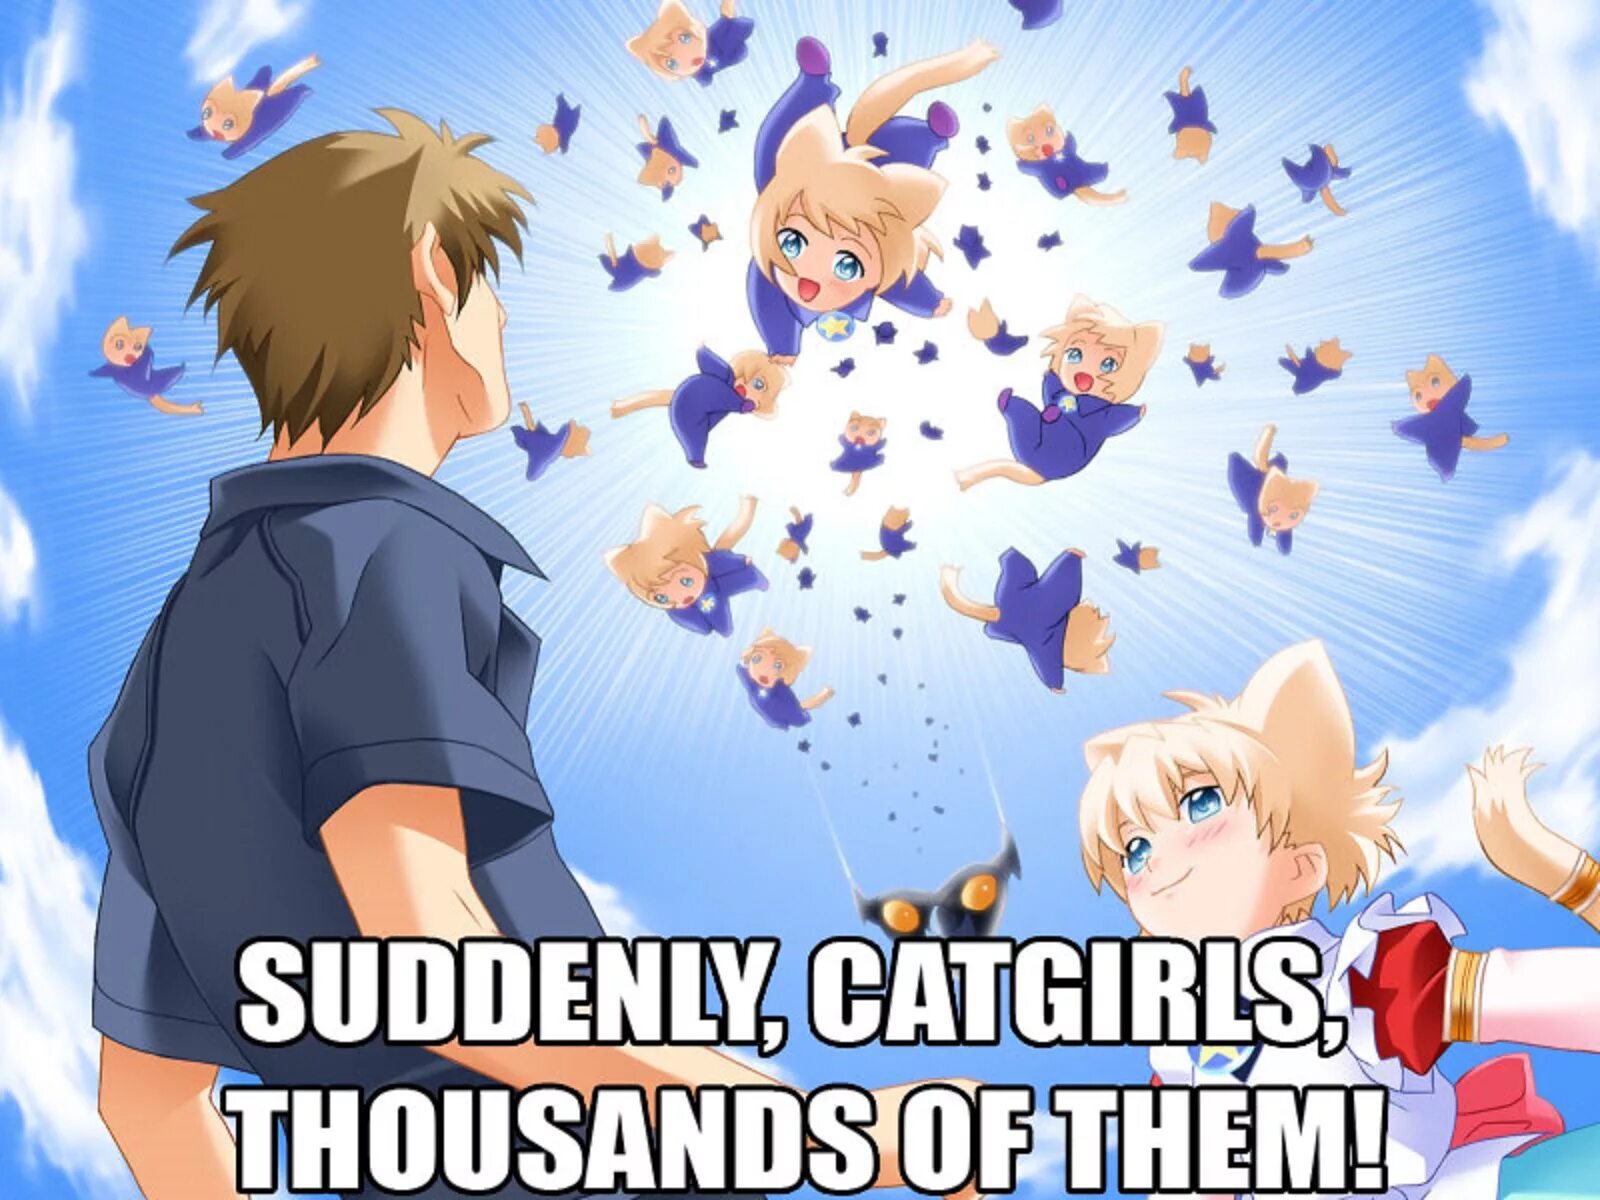 Suddenly картинка. Suddenly catgirls, Thousands of them. Happen suddenly.